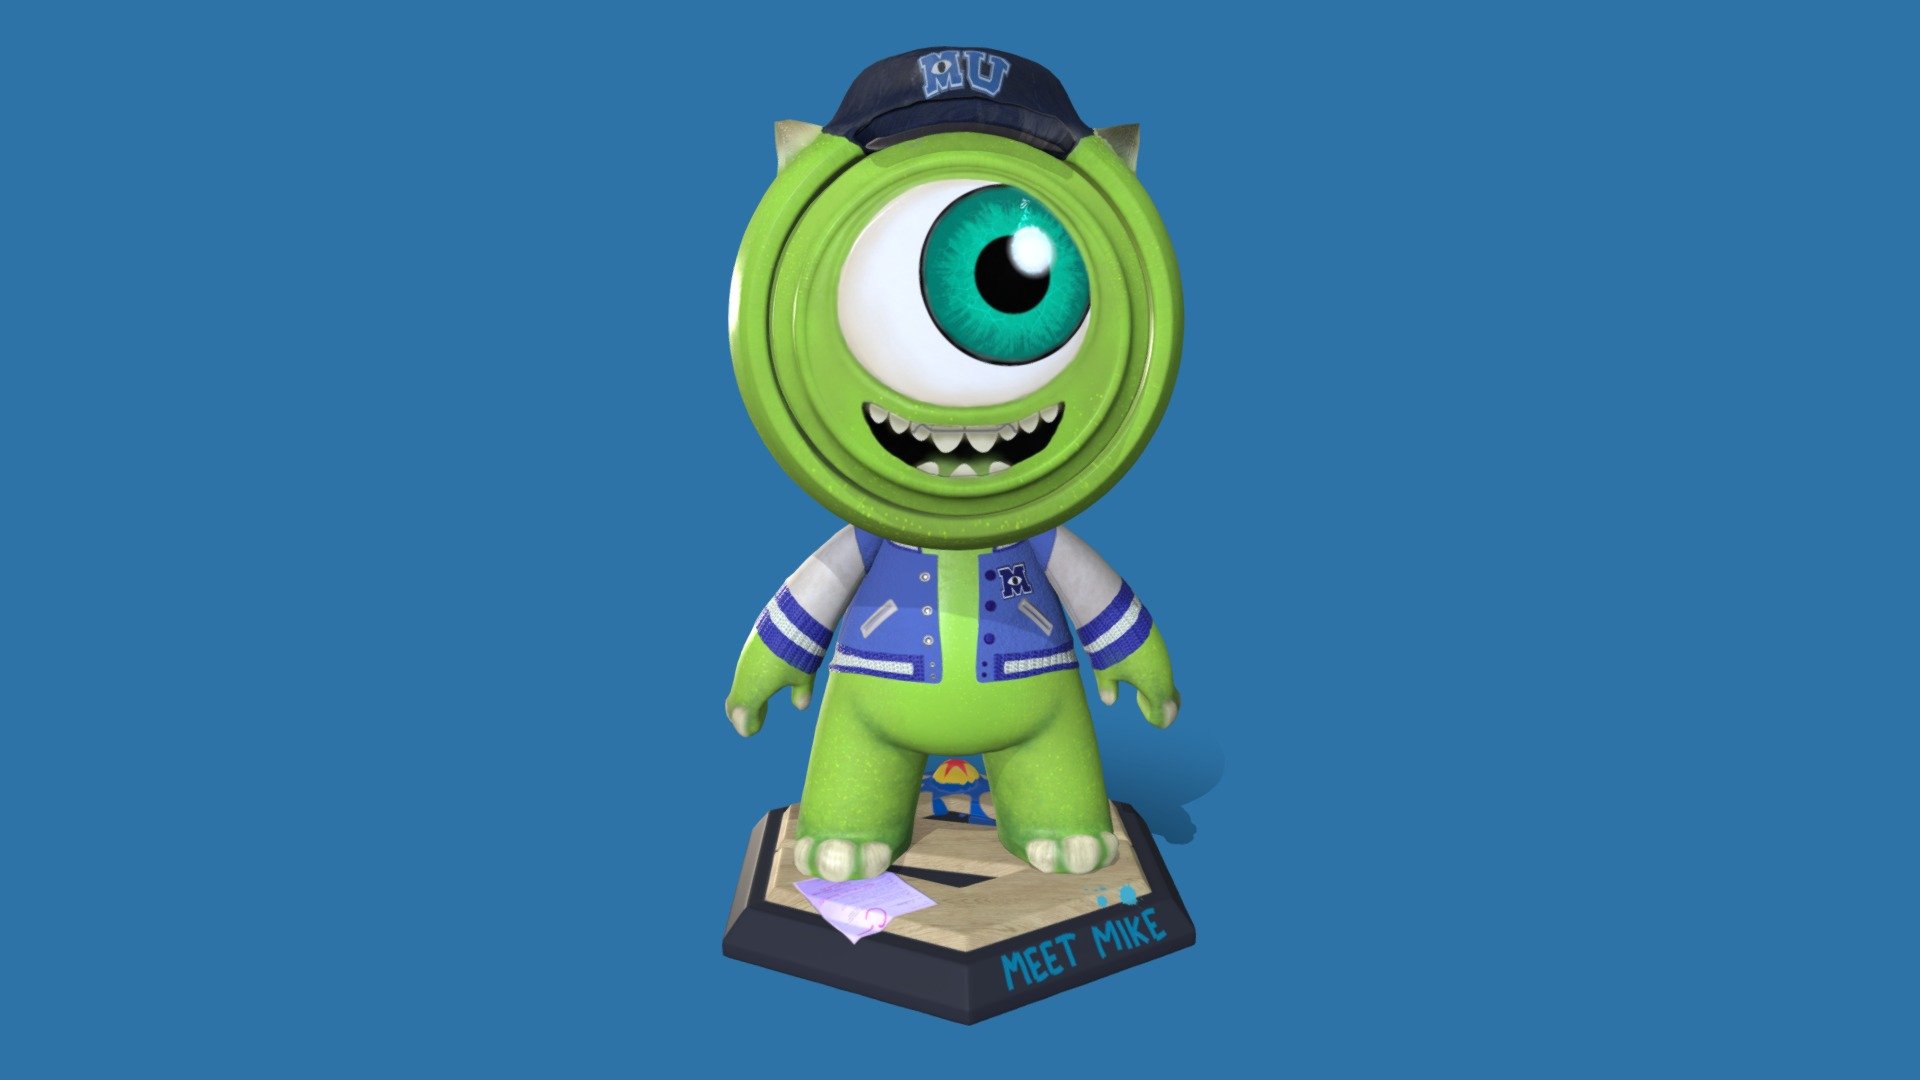 MEET MIKE!
This is my Student Entry for Substance's MeetMat2 texturing contest.
I had a lot of fun texturing my favourite character &ldquo;Mike Wazowksi